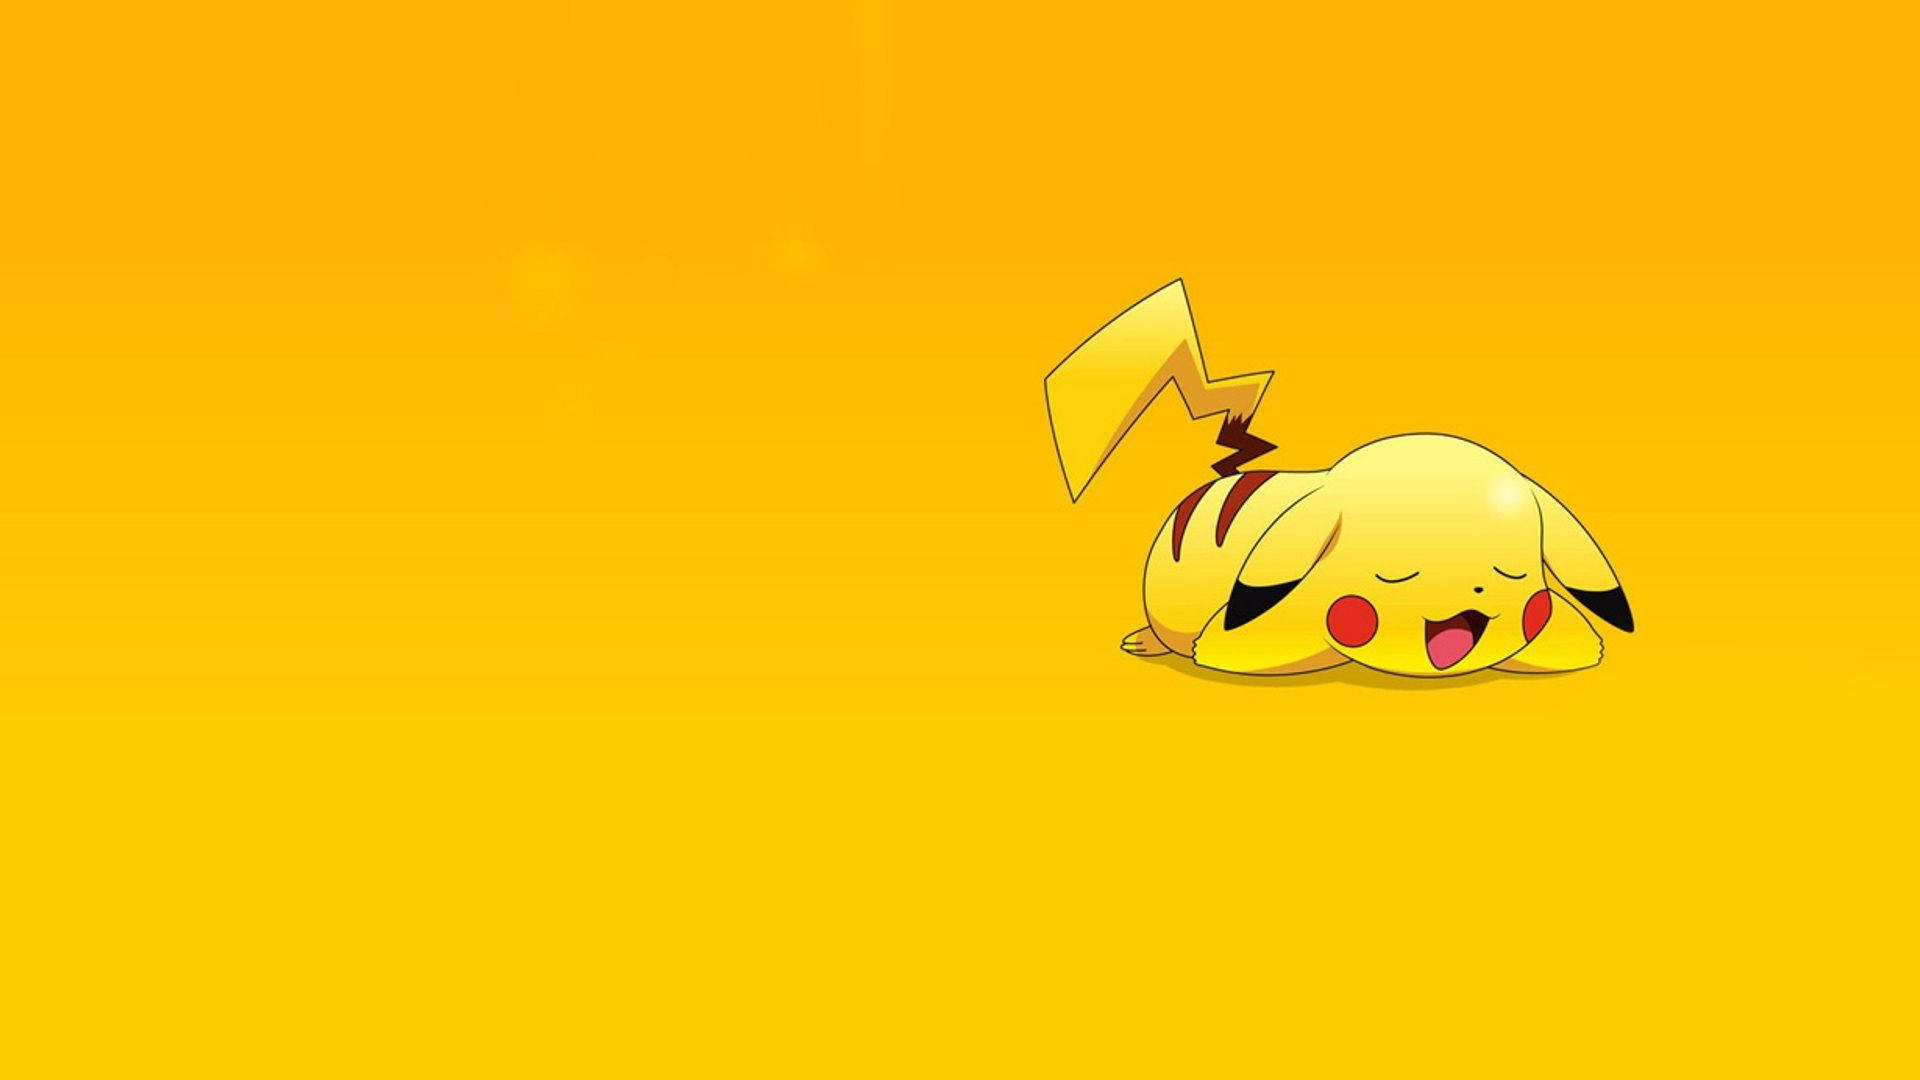 A Pikachu That's Ready For A Nap Background